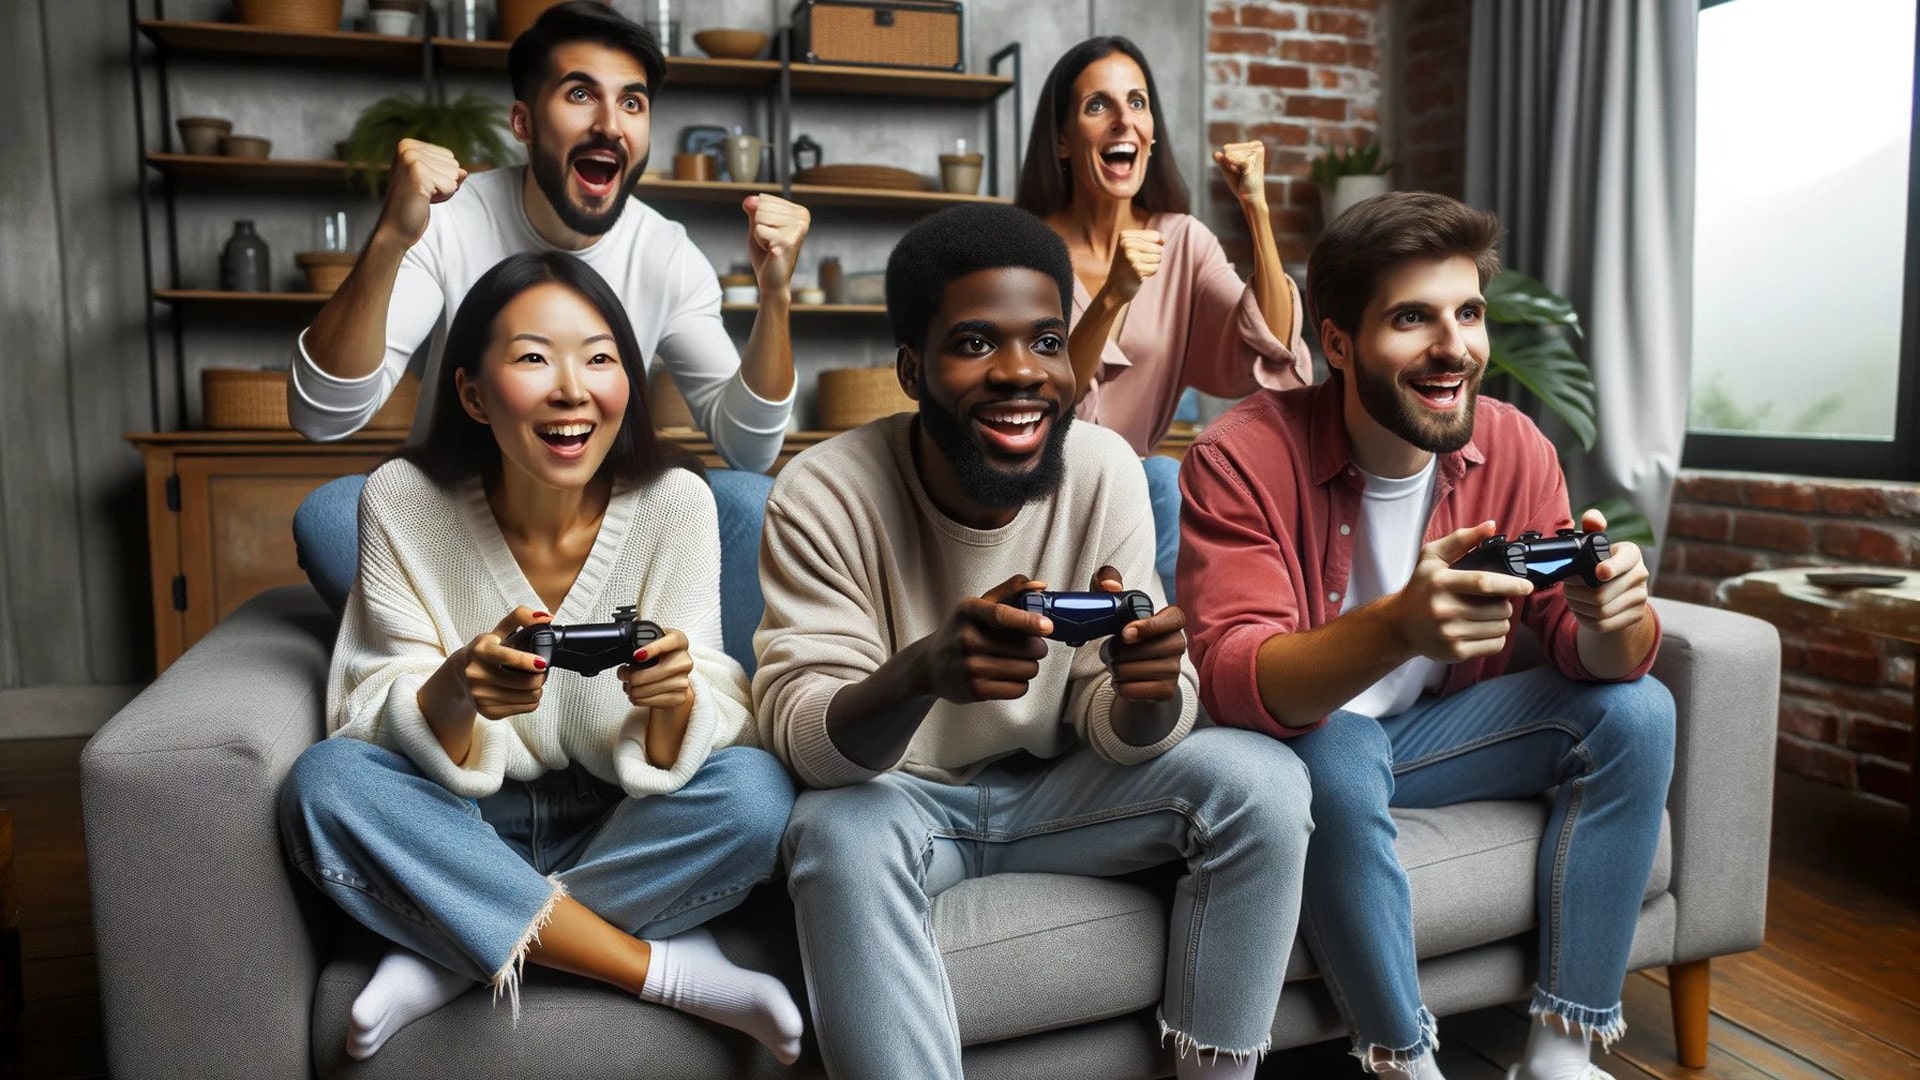 A group of people playing video games together in a living room